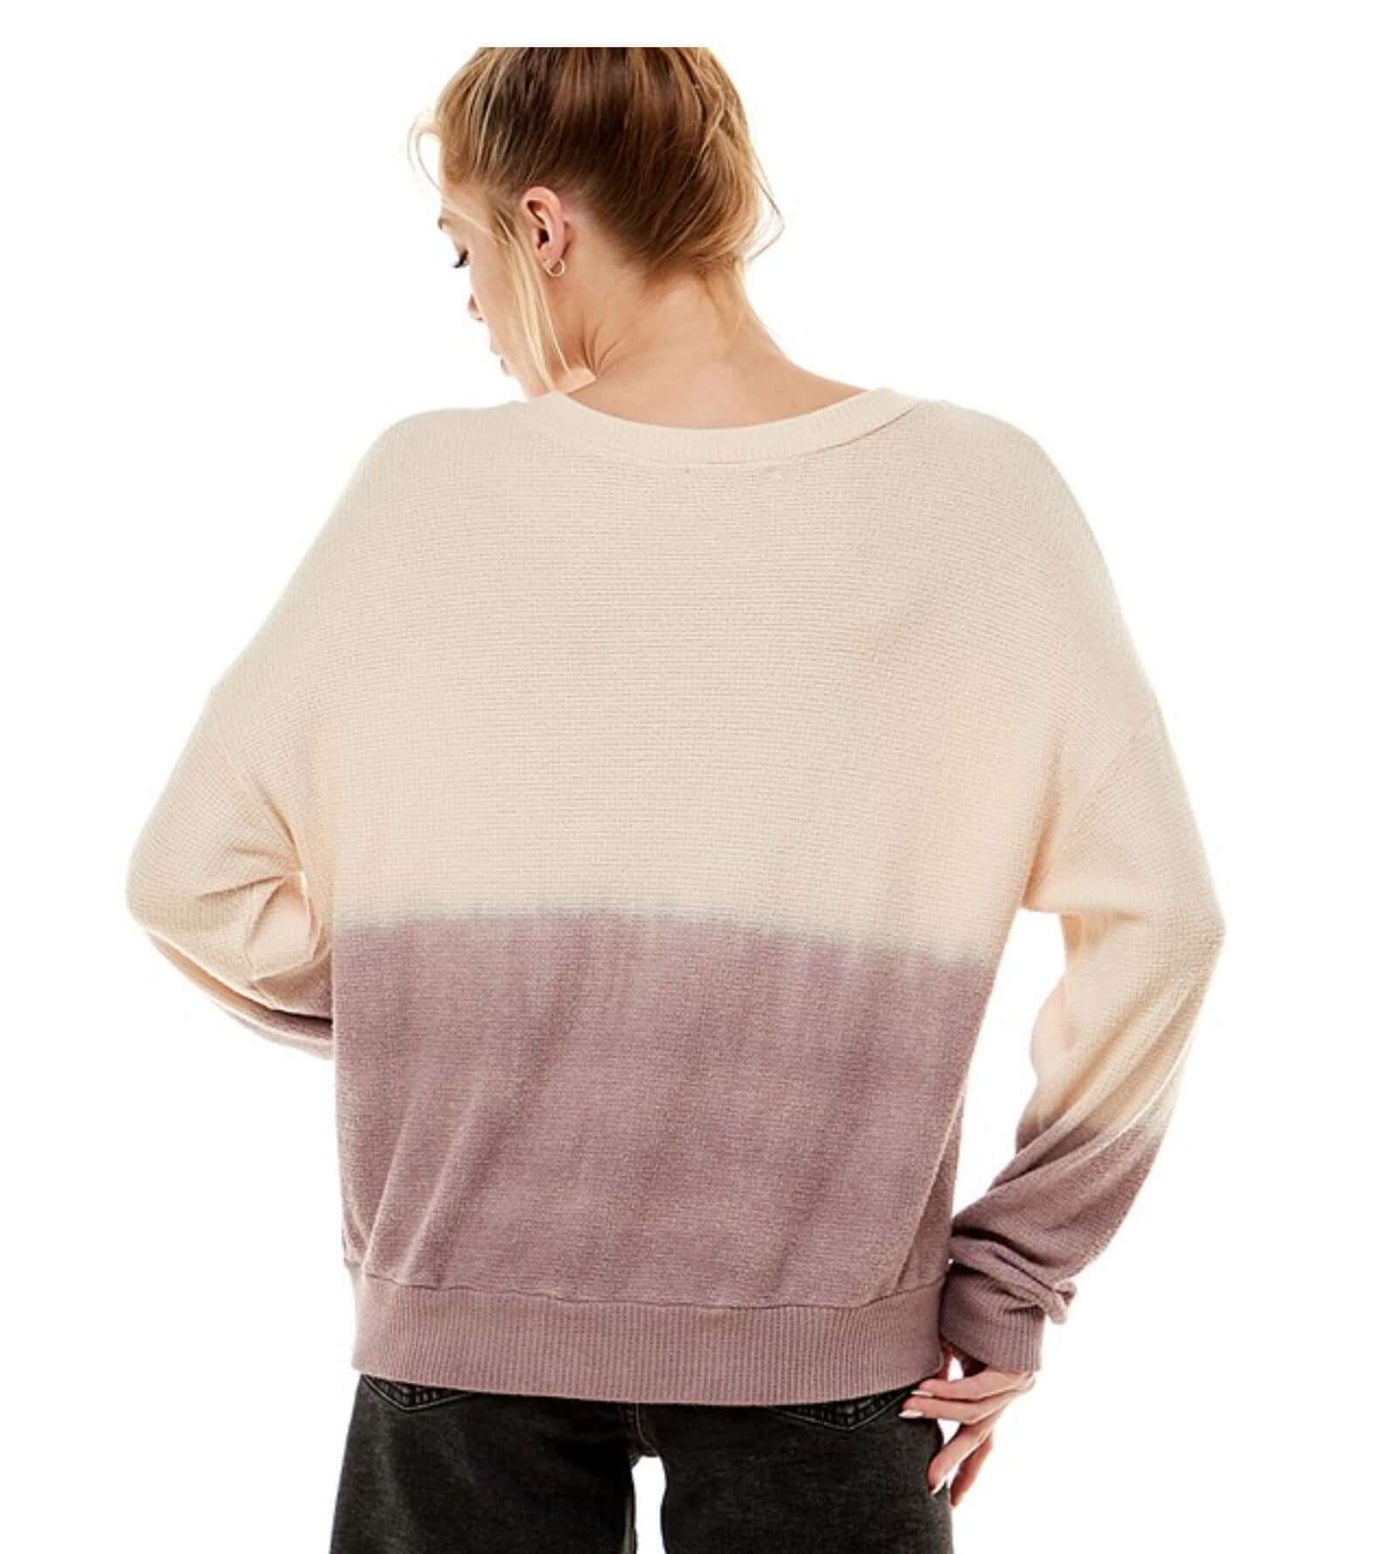 USA Made Ladies Special Dip Dyed Super Soft Lightweight Mauve Sweater Lightweight | T-Party Style# BRP38376 | Women's Clothing Made in America